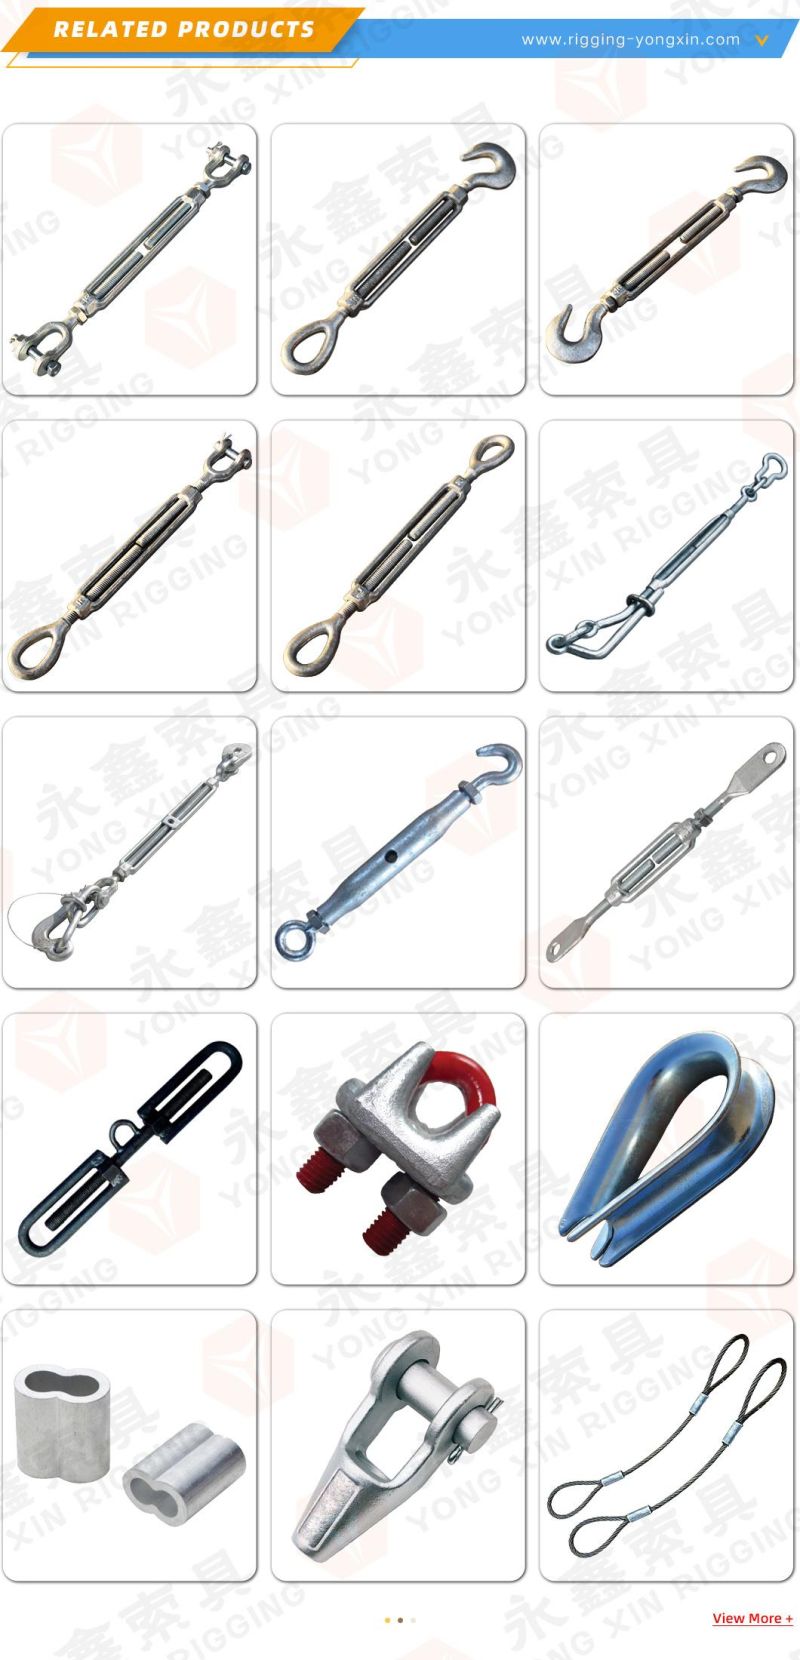 Open Body Stainless Steel Rigging Hardware Wire Rope Turnbuckle with Eye and Hook